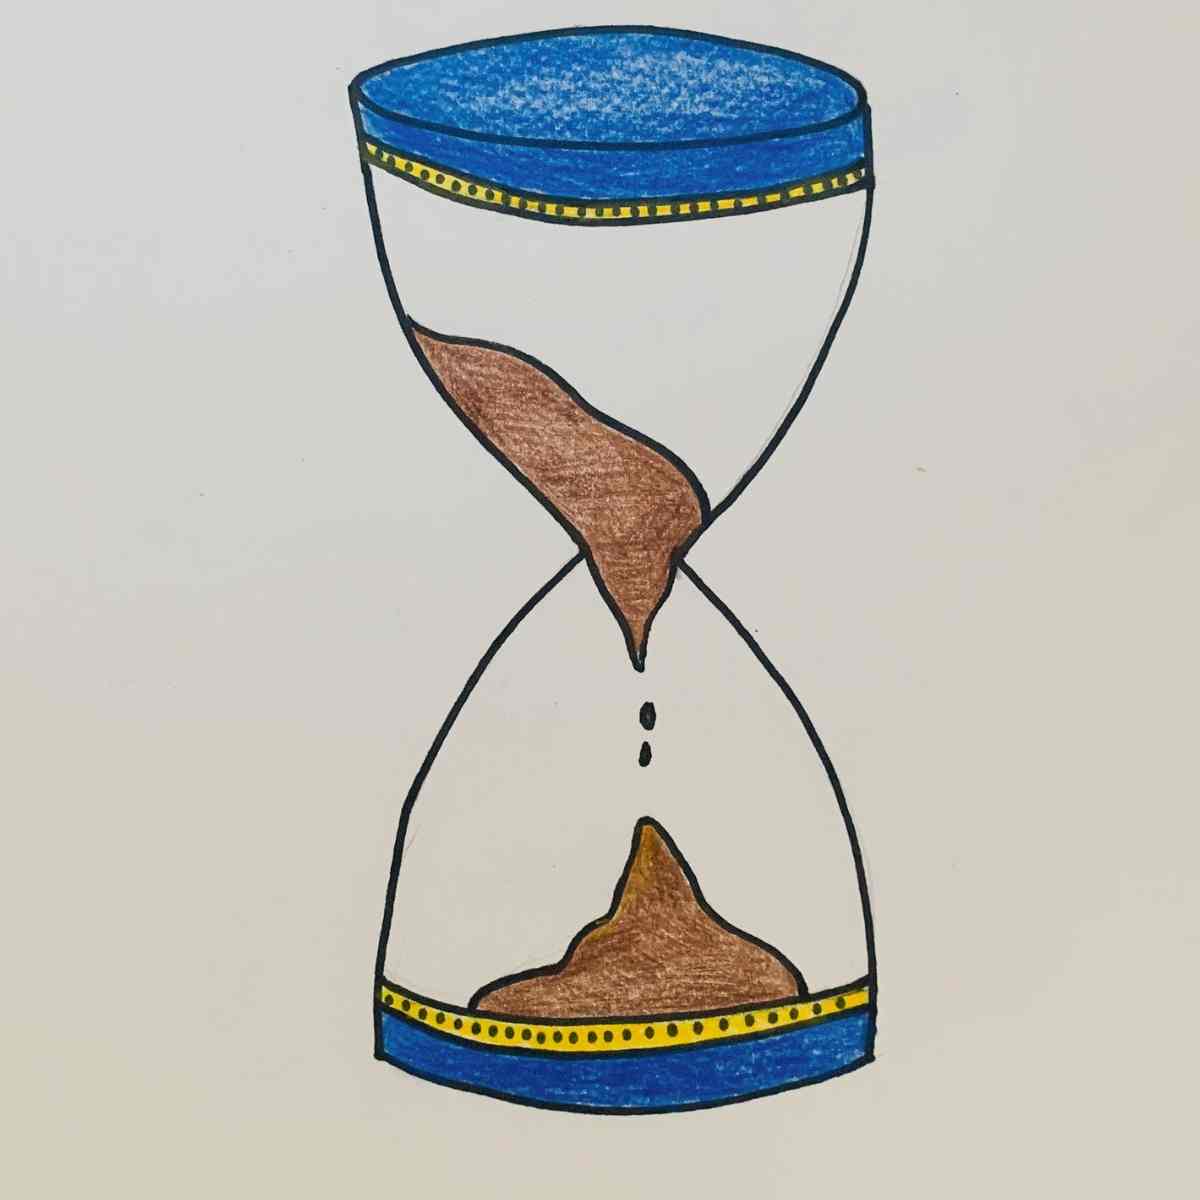 How to color an hourglass